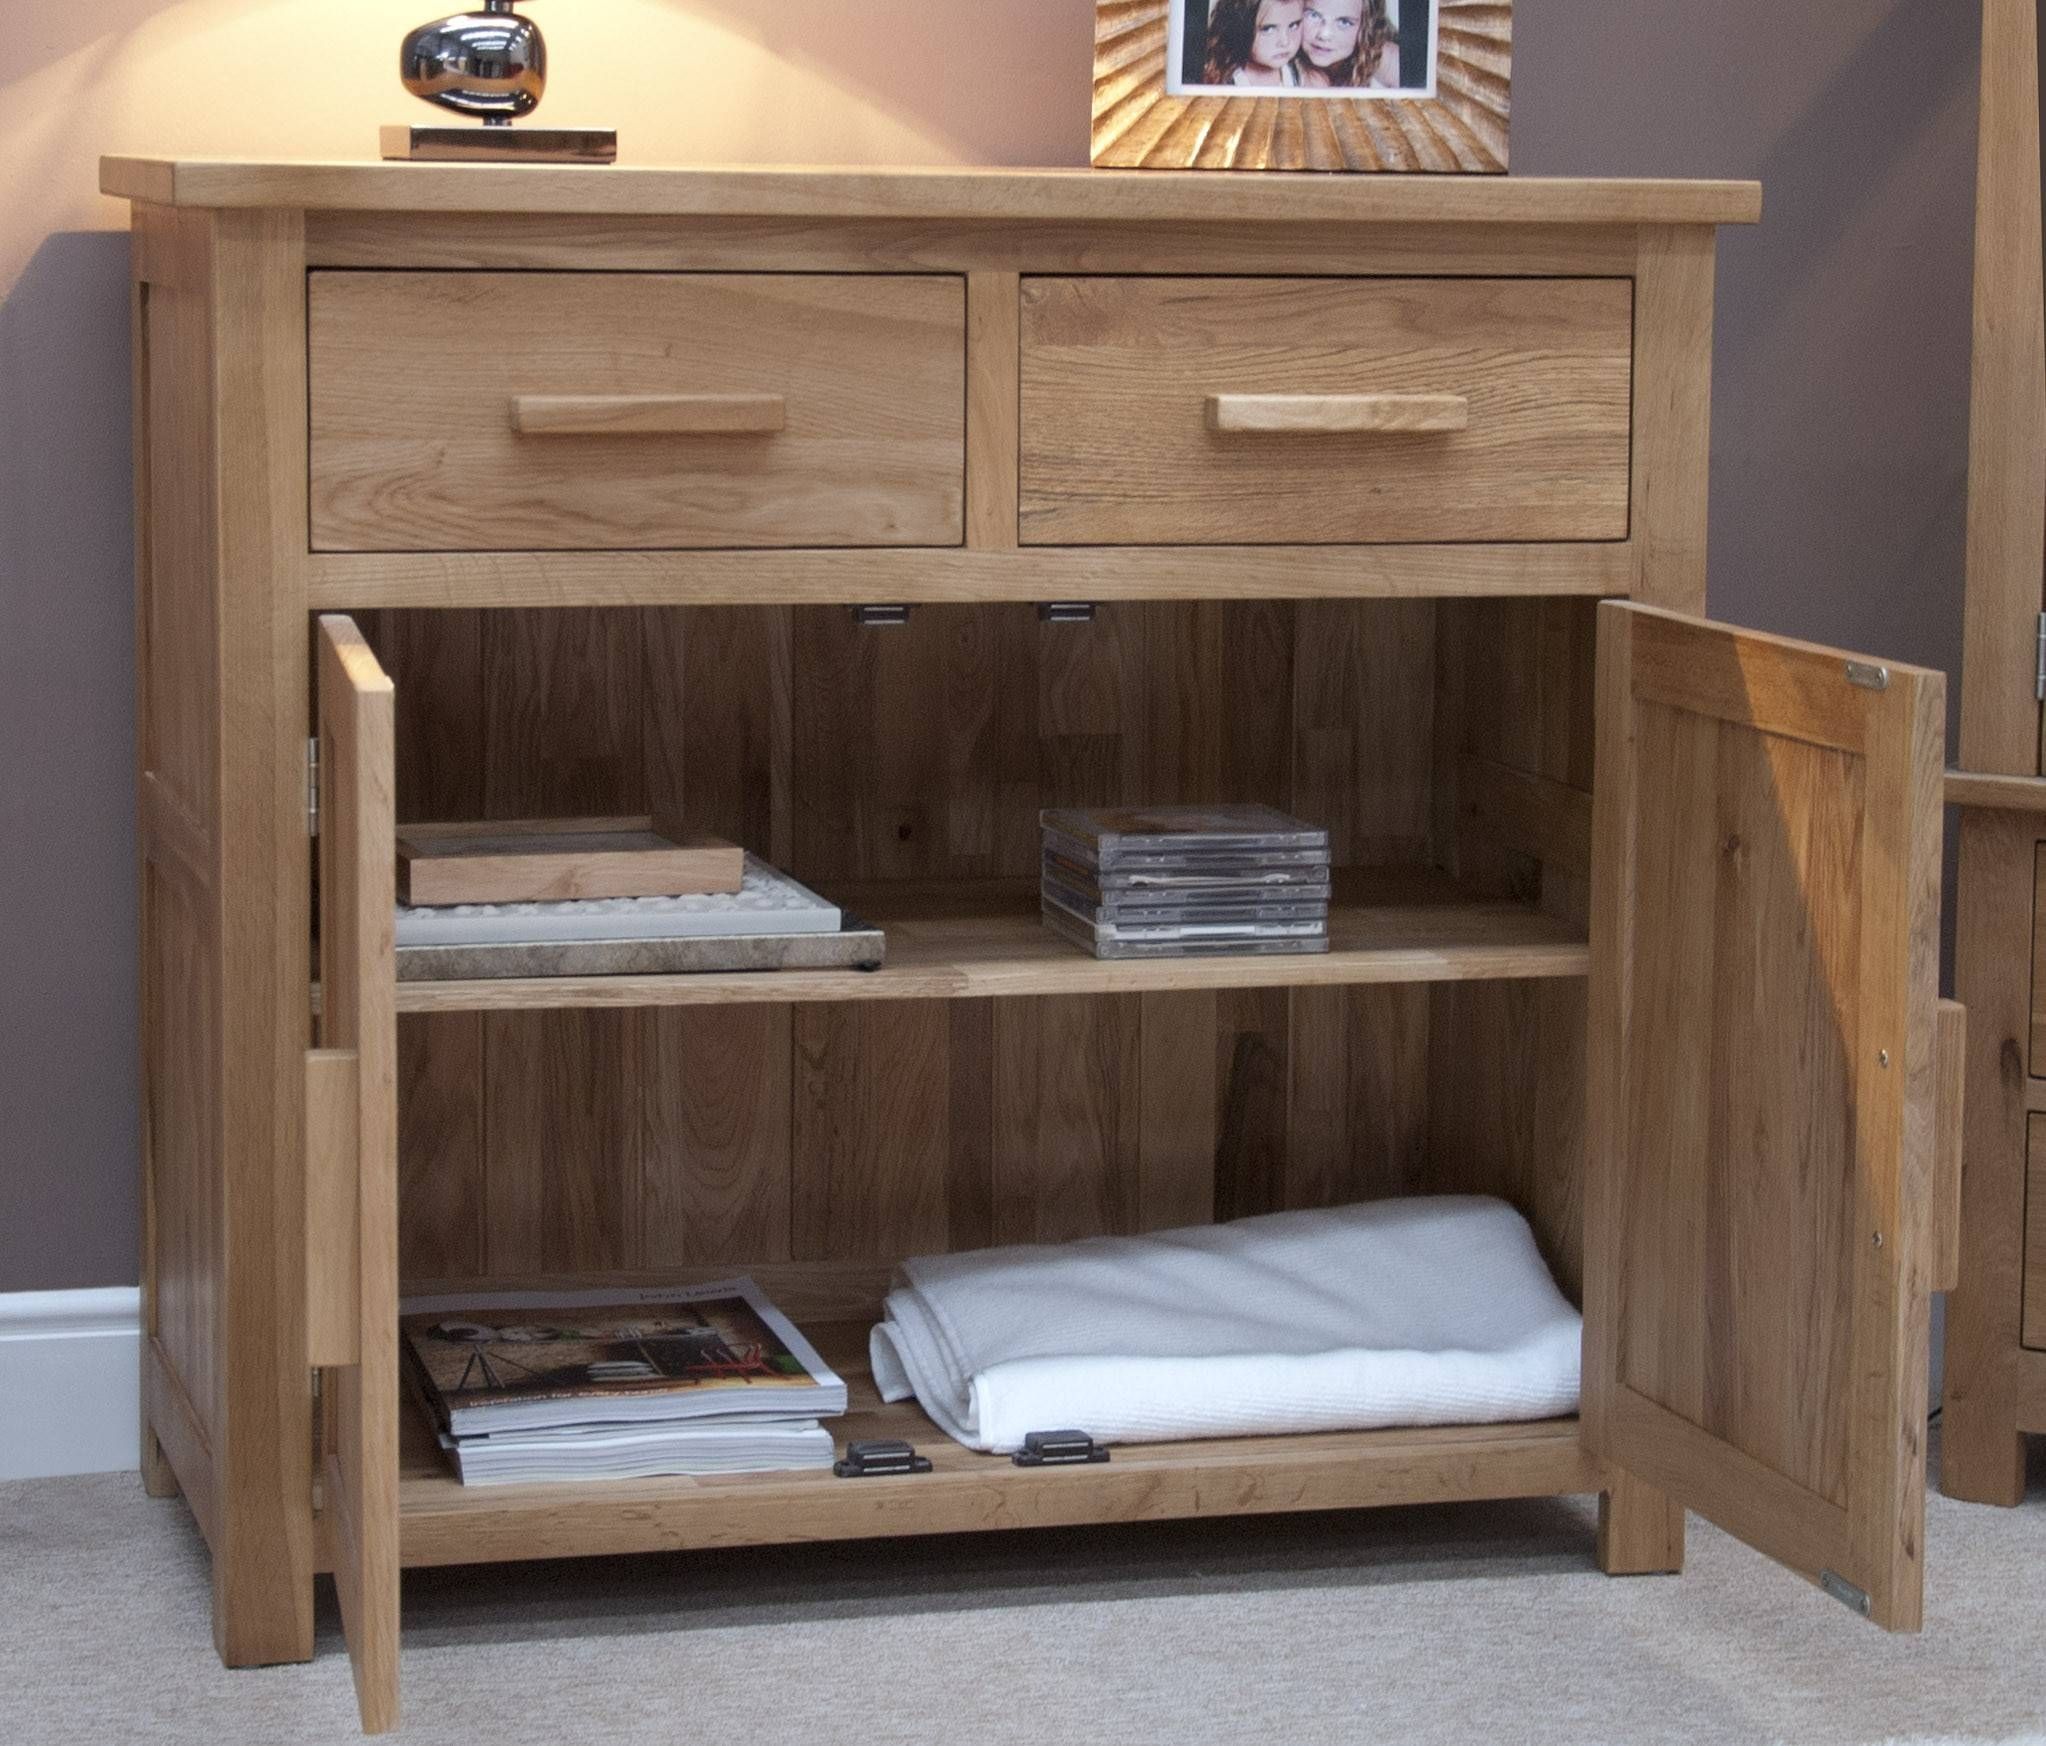 Opus Oak Furniture Small Sideboard | Furniture4yourhome Inside Small Sideboard Cabinets (View 13 of 30)